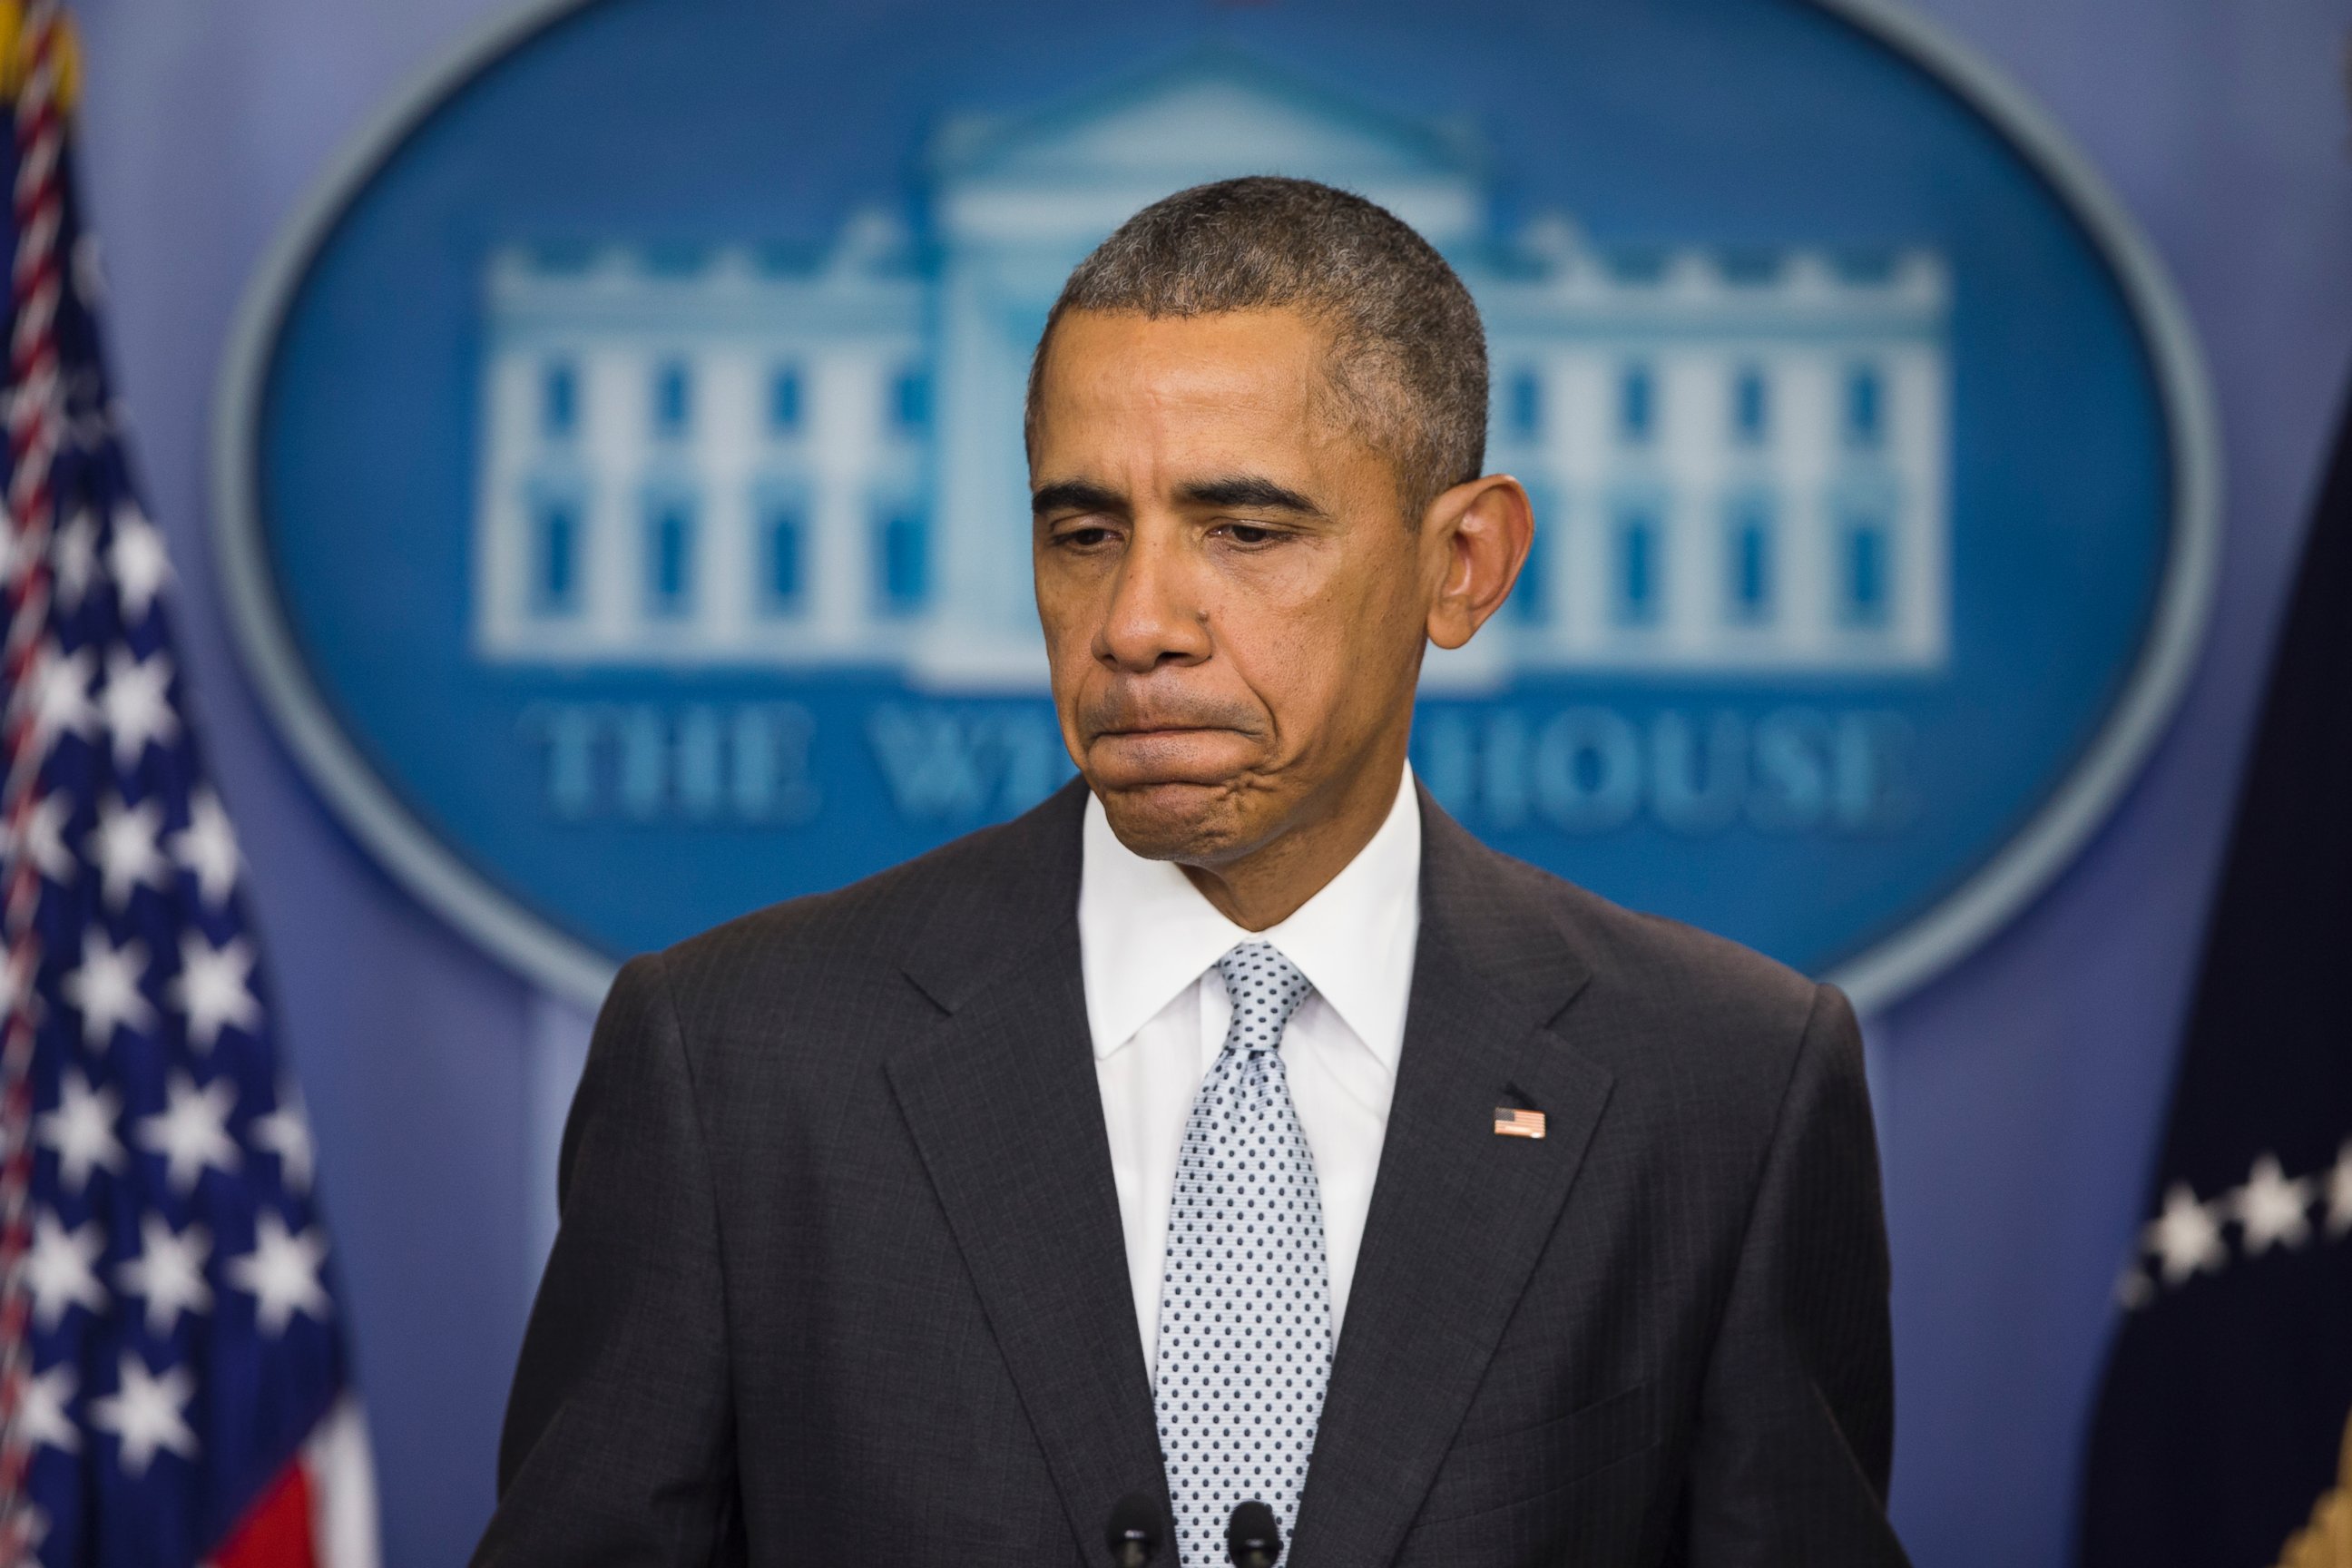 Obama Heartbreaking Paris Terror Is Attack On All of Humanity image